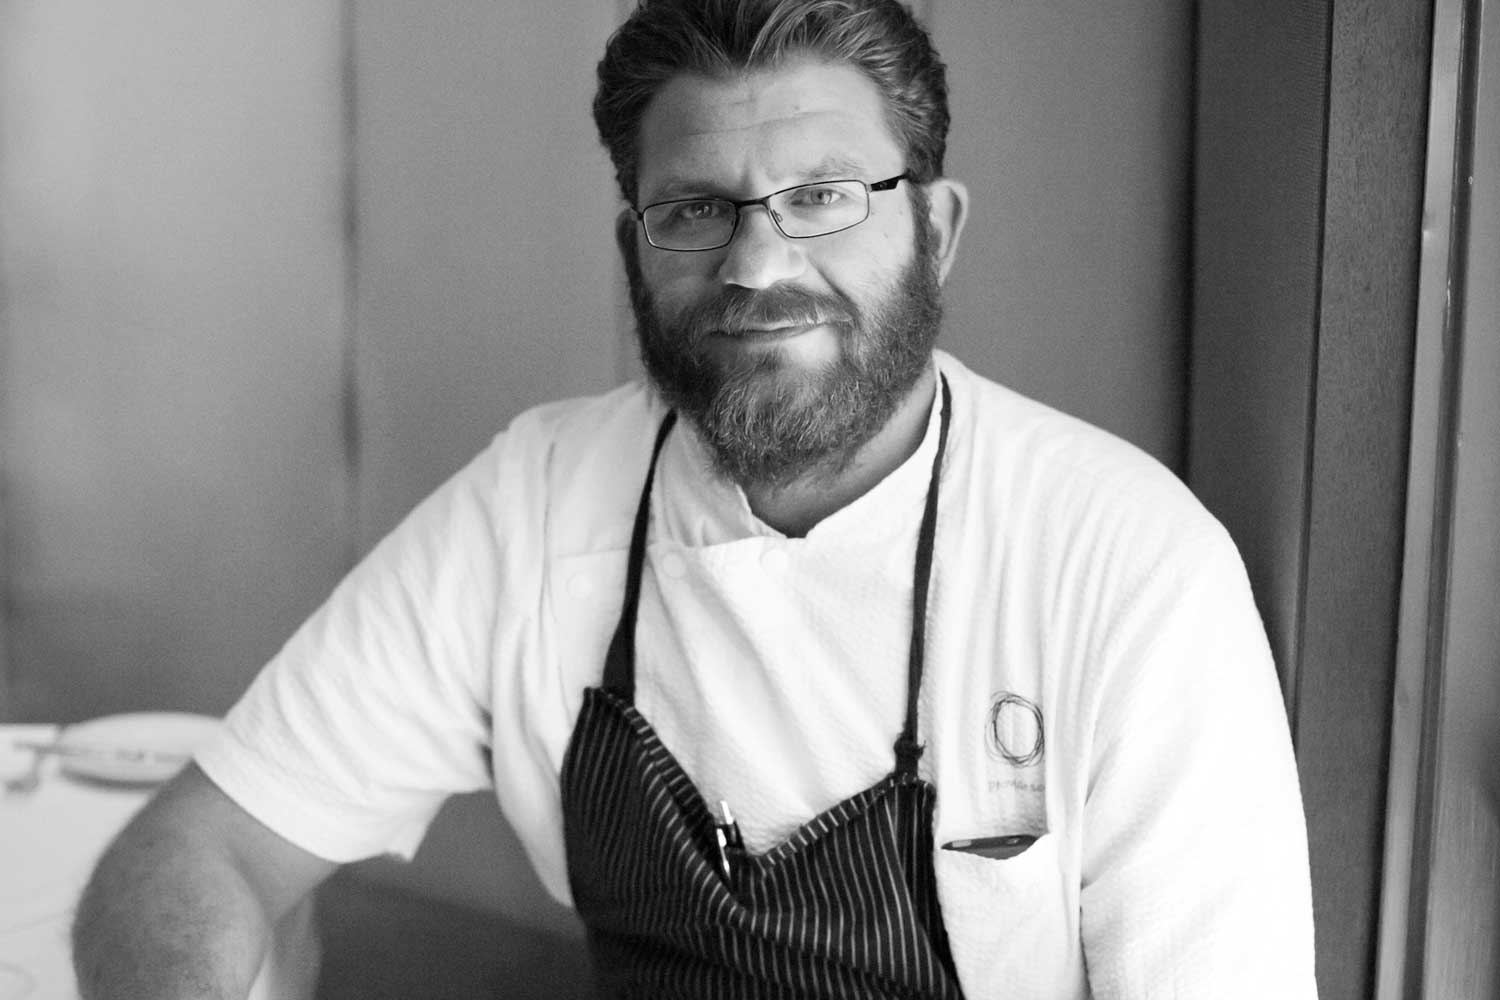 Michael Cimarusti, Co-owner and Chef